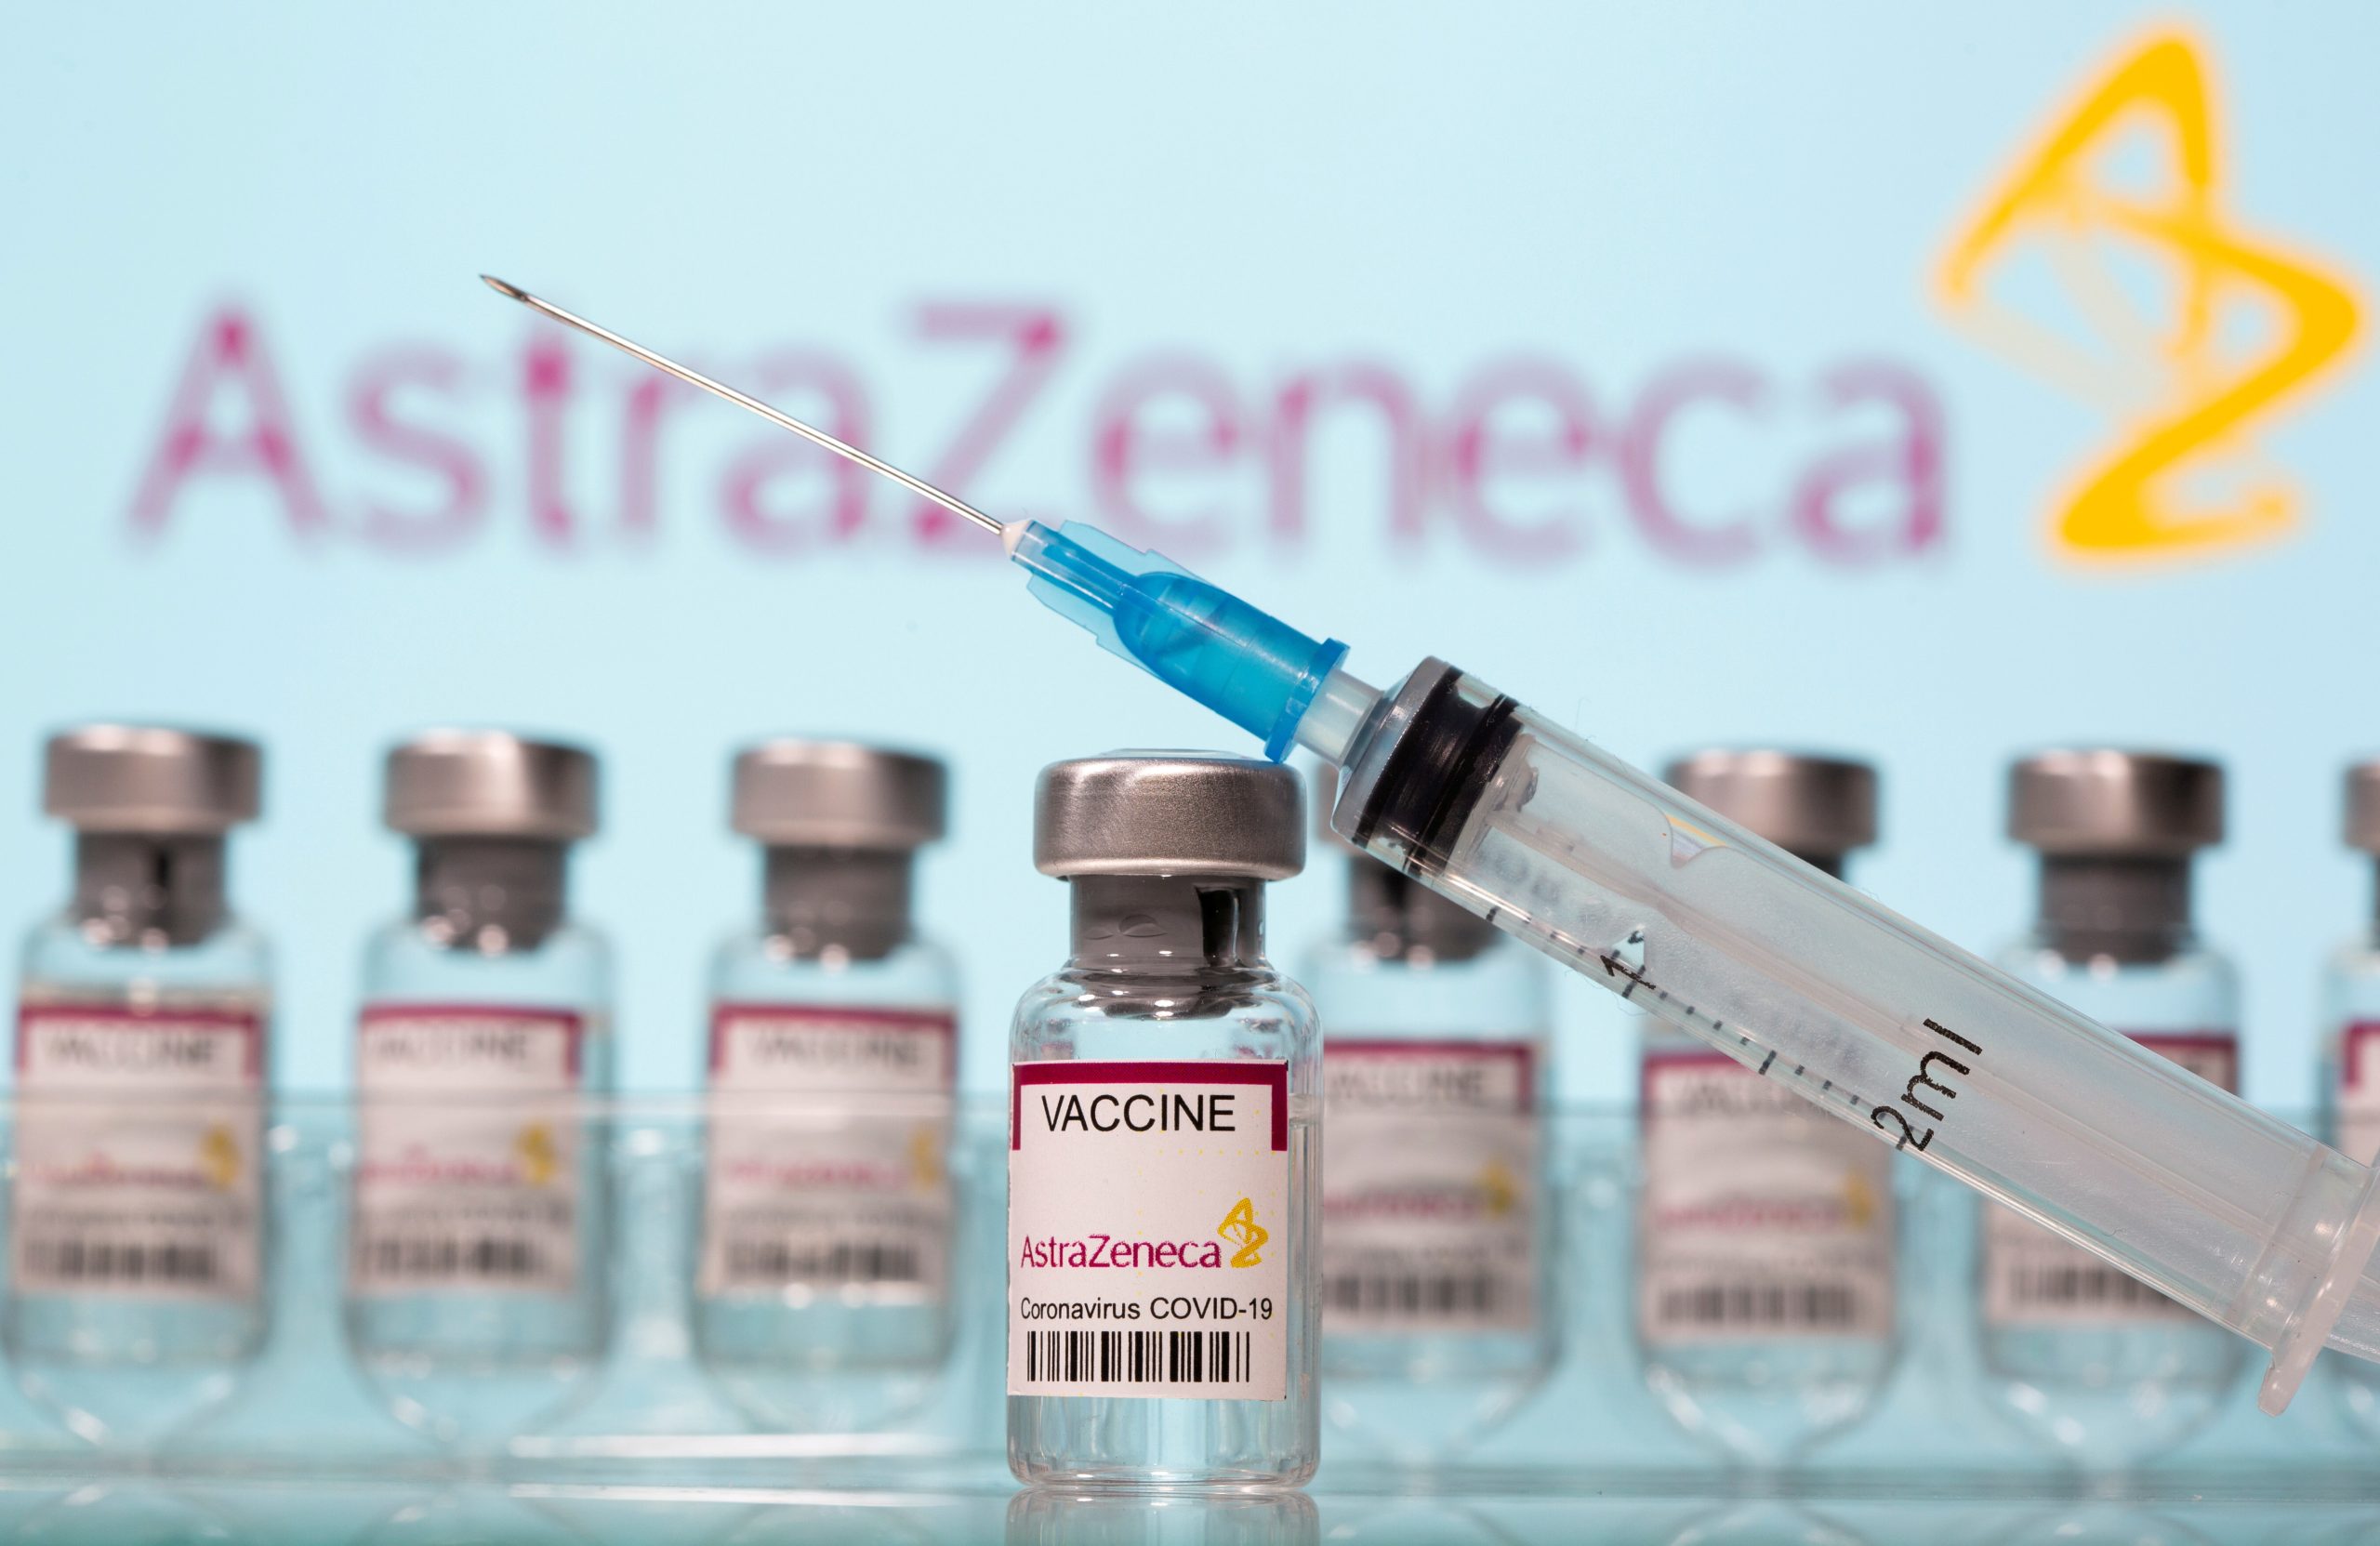 FILE PHOTO: Vials labelled “AstraZeneca COVID-19 Coronavirus Vaccine” and a syringe are seen in front of a displayed AstraZeneca logo